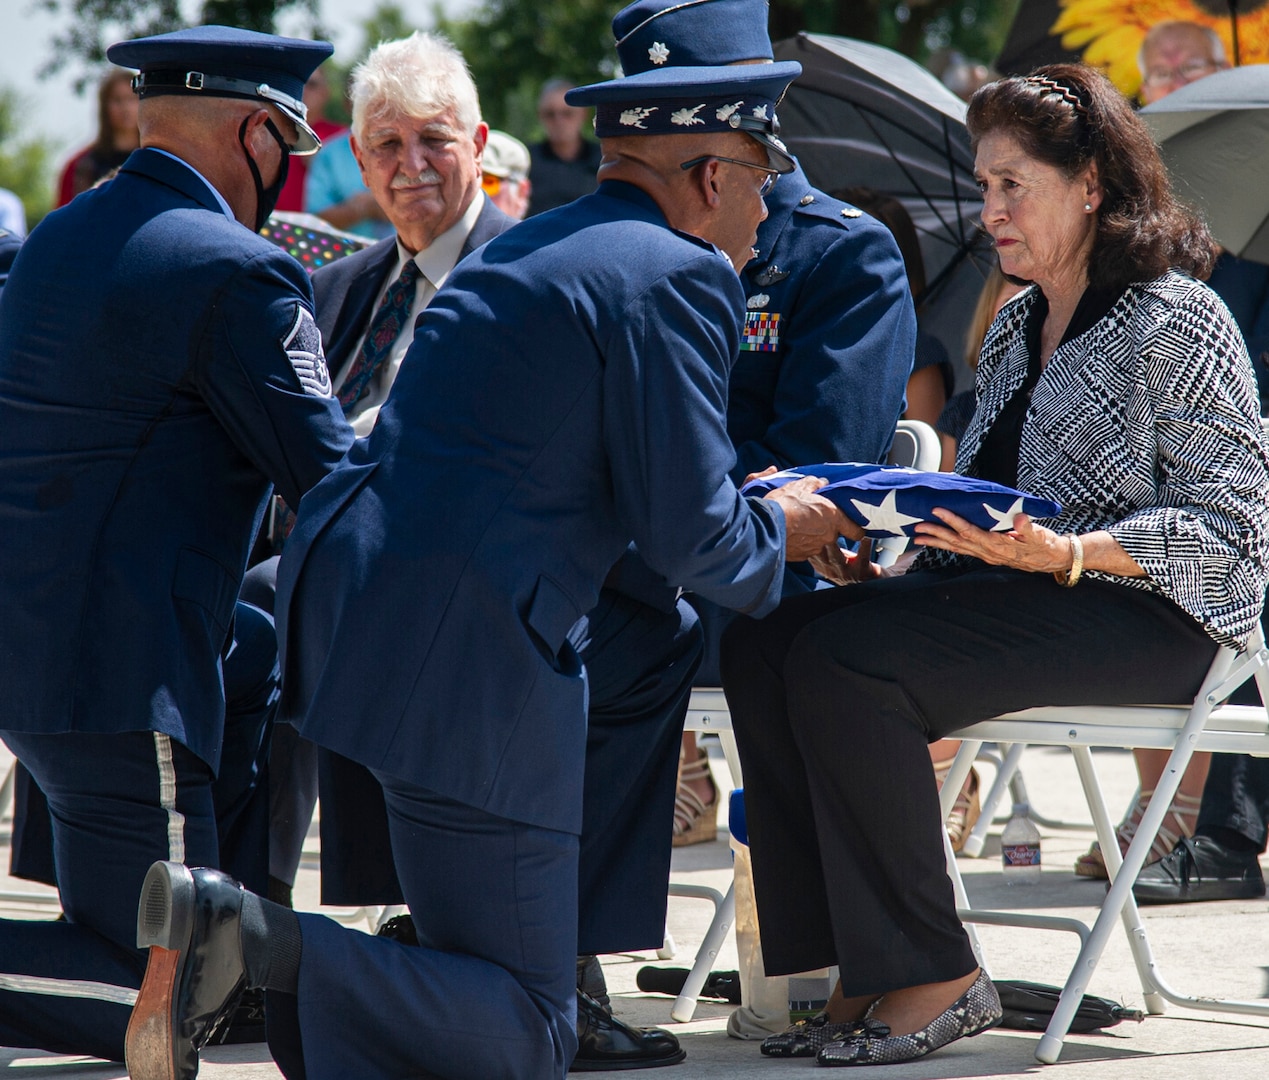 Air Force Chief of Staff Gen. CQ Brown Jr. presents the U.S. flag to retired Col. Richard E. Cole’s daughter, Cindy Chal, during his interment ceremony, Sept. 7, 2021.